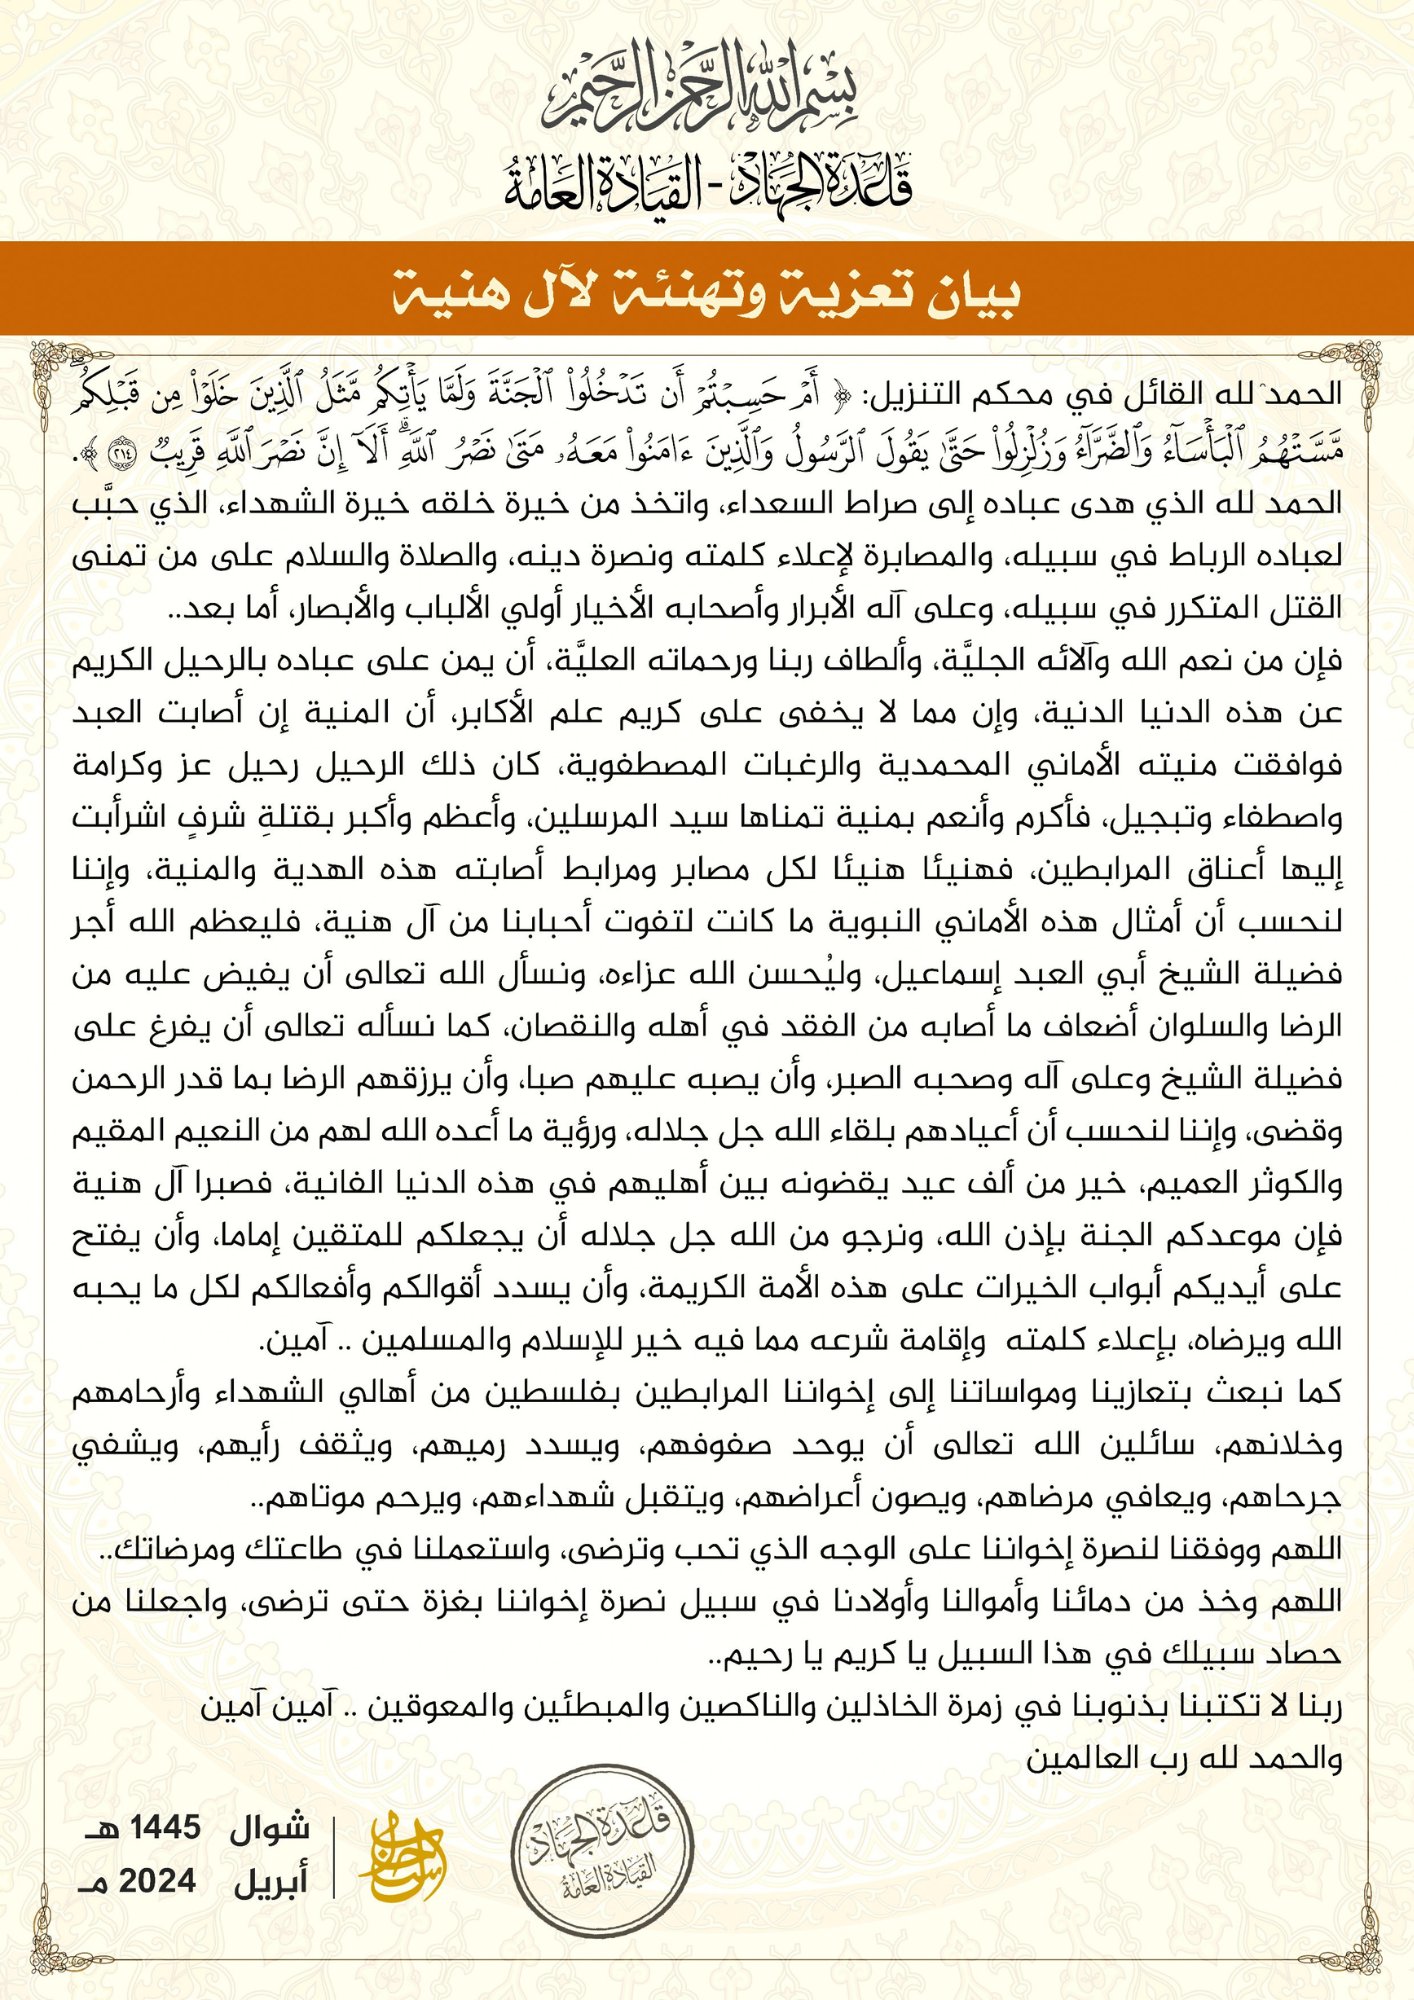 (Statement) as-Sahab Media (al-Qaeda Central Command / AQC) "Statement of Condolence and Congratulations to the Haniyeh Family" - 21 April 2024